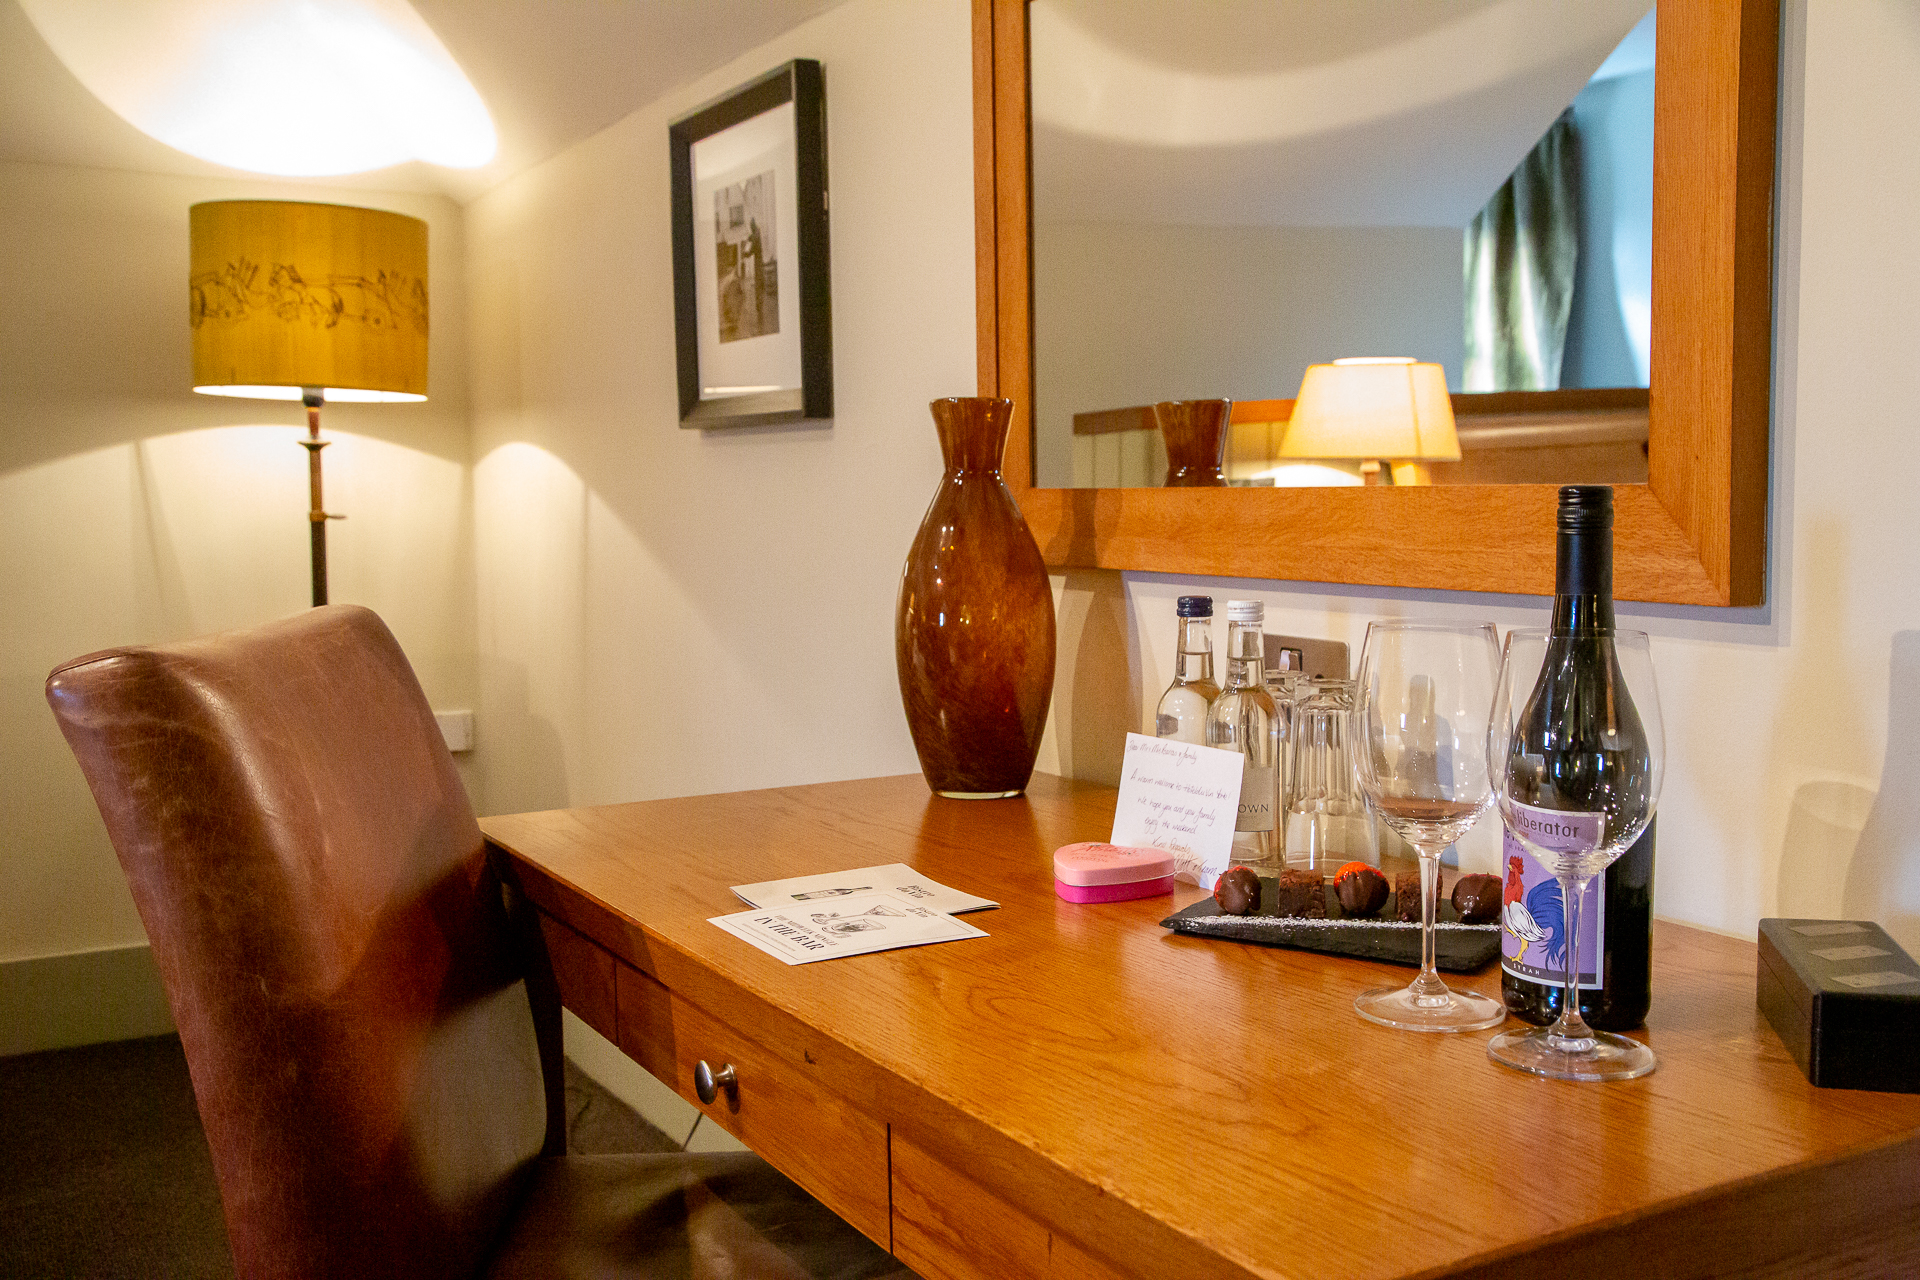 luxurious suite at the Hotel du Vin in York